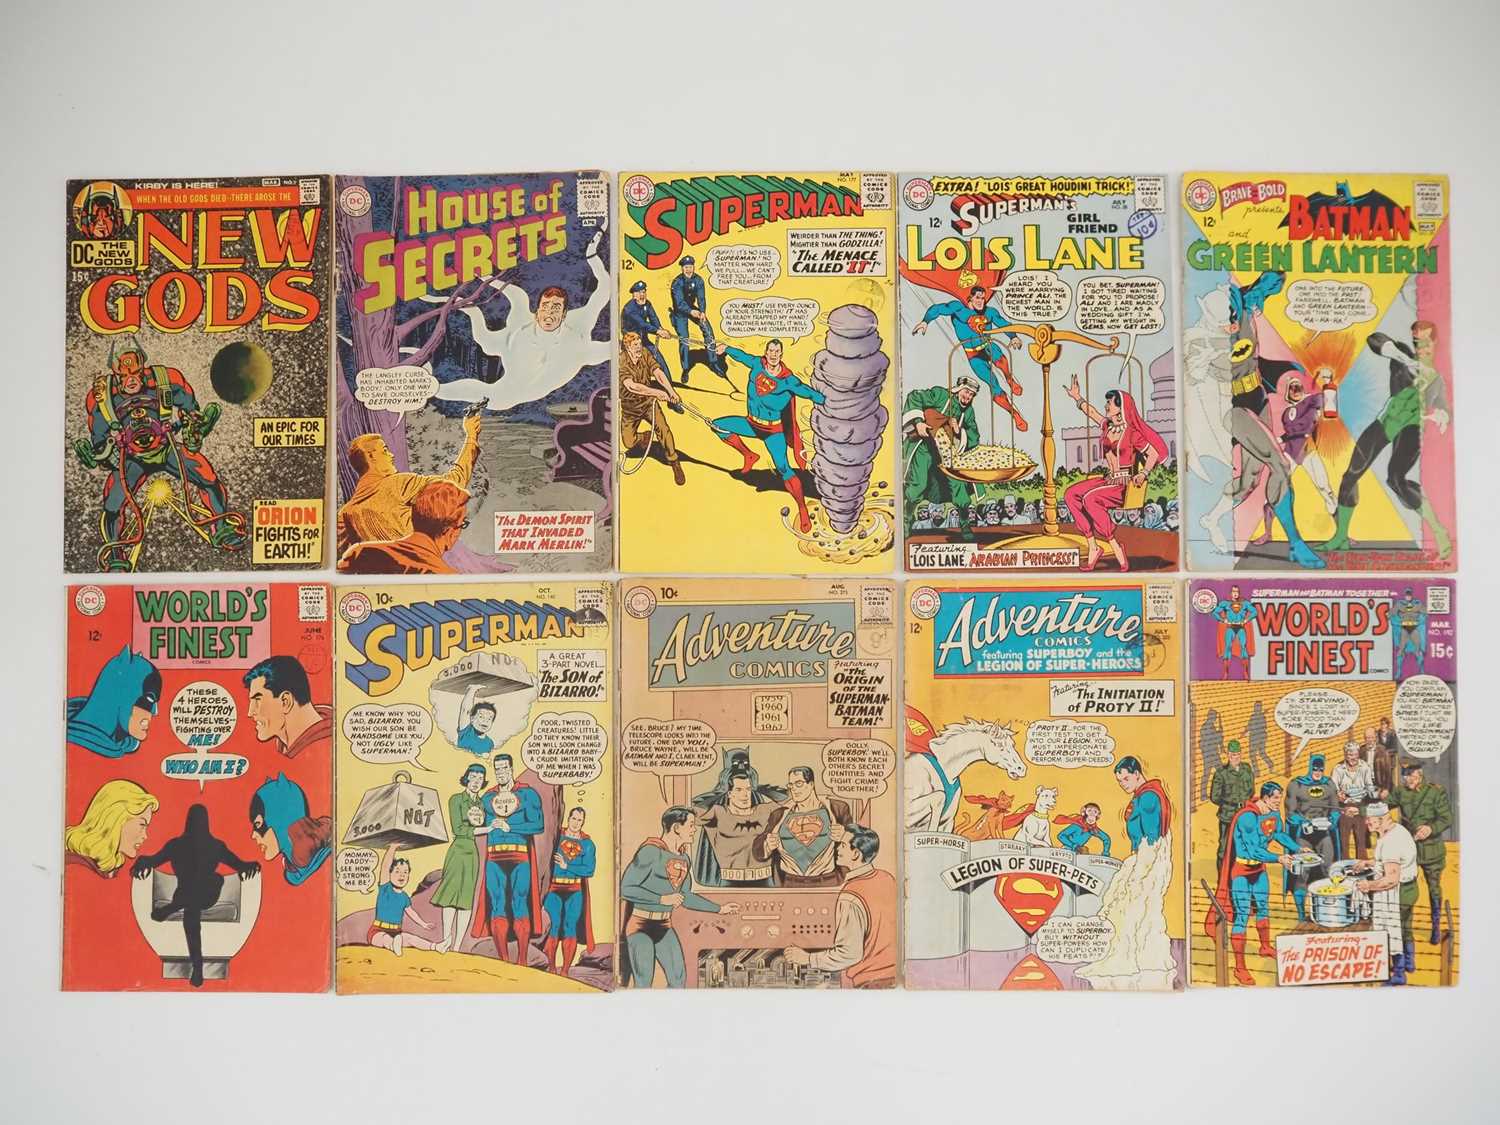 MIXED DC SILVER AGE LOT (10 in Lot) - Includes NEW GODS #1 + HOUSE OF SECRETS #59 + SUPERMAN #140,